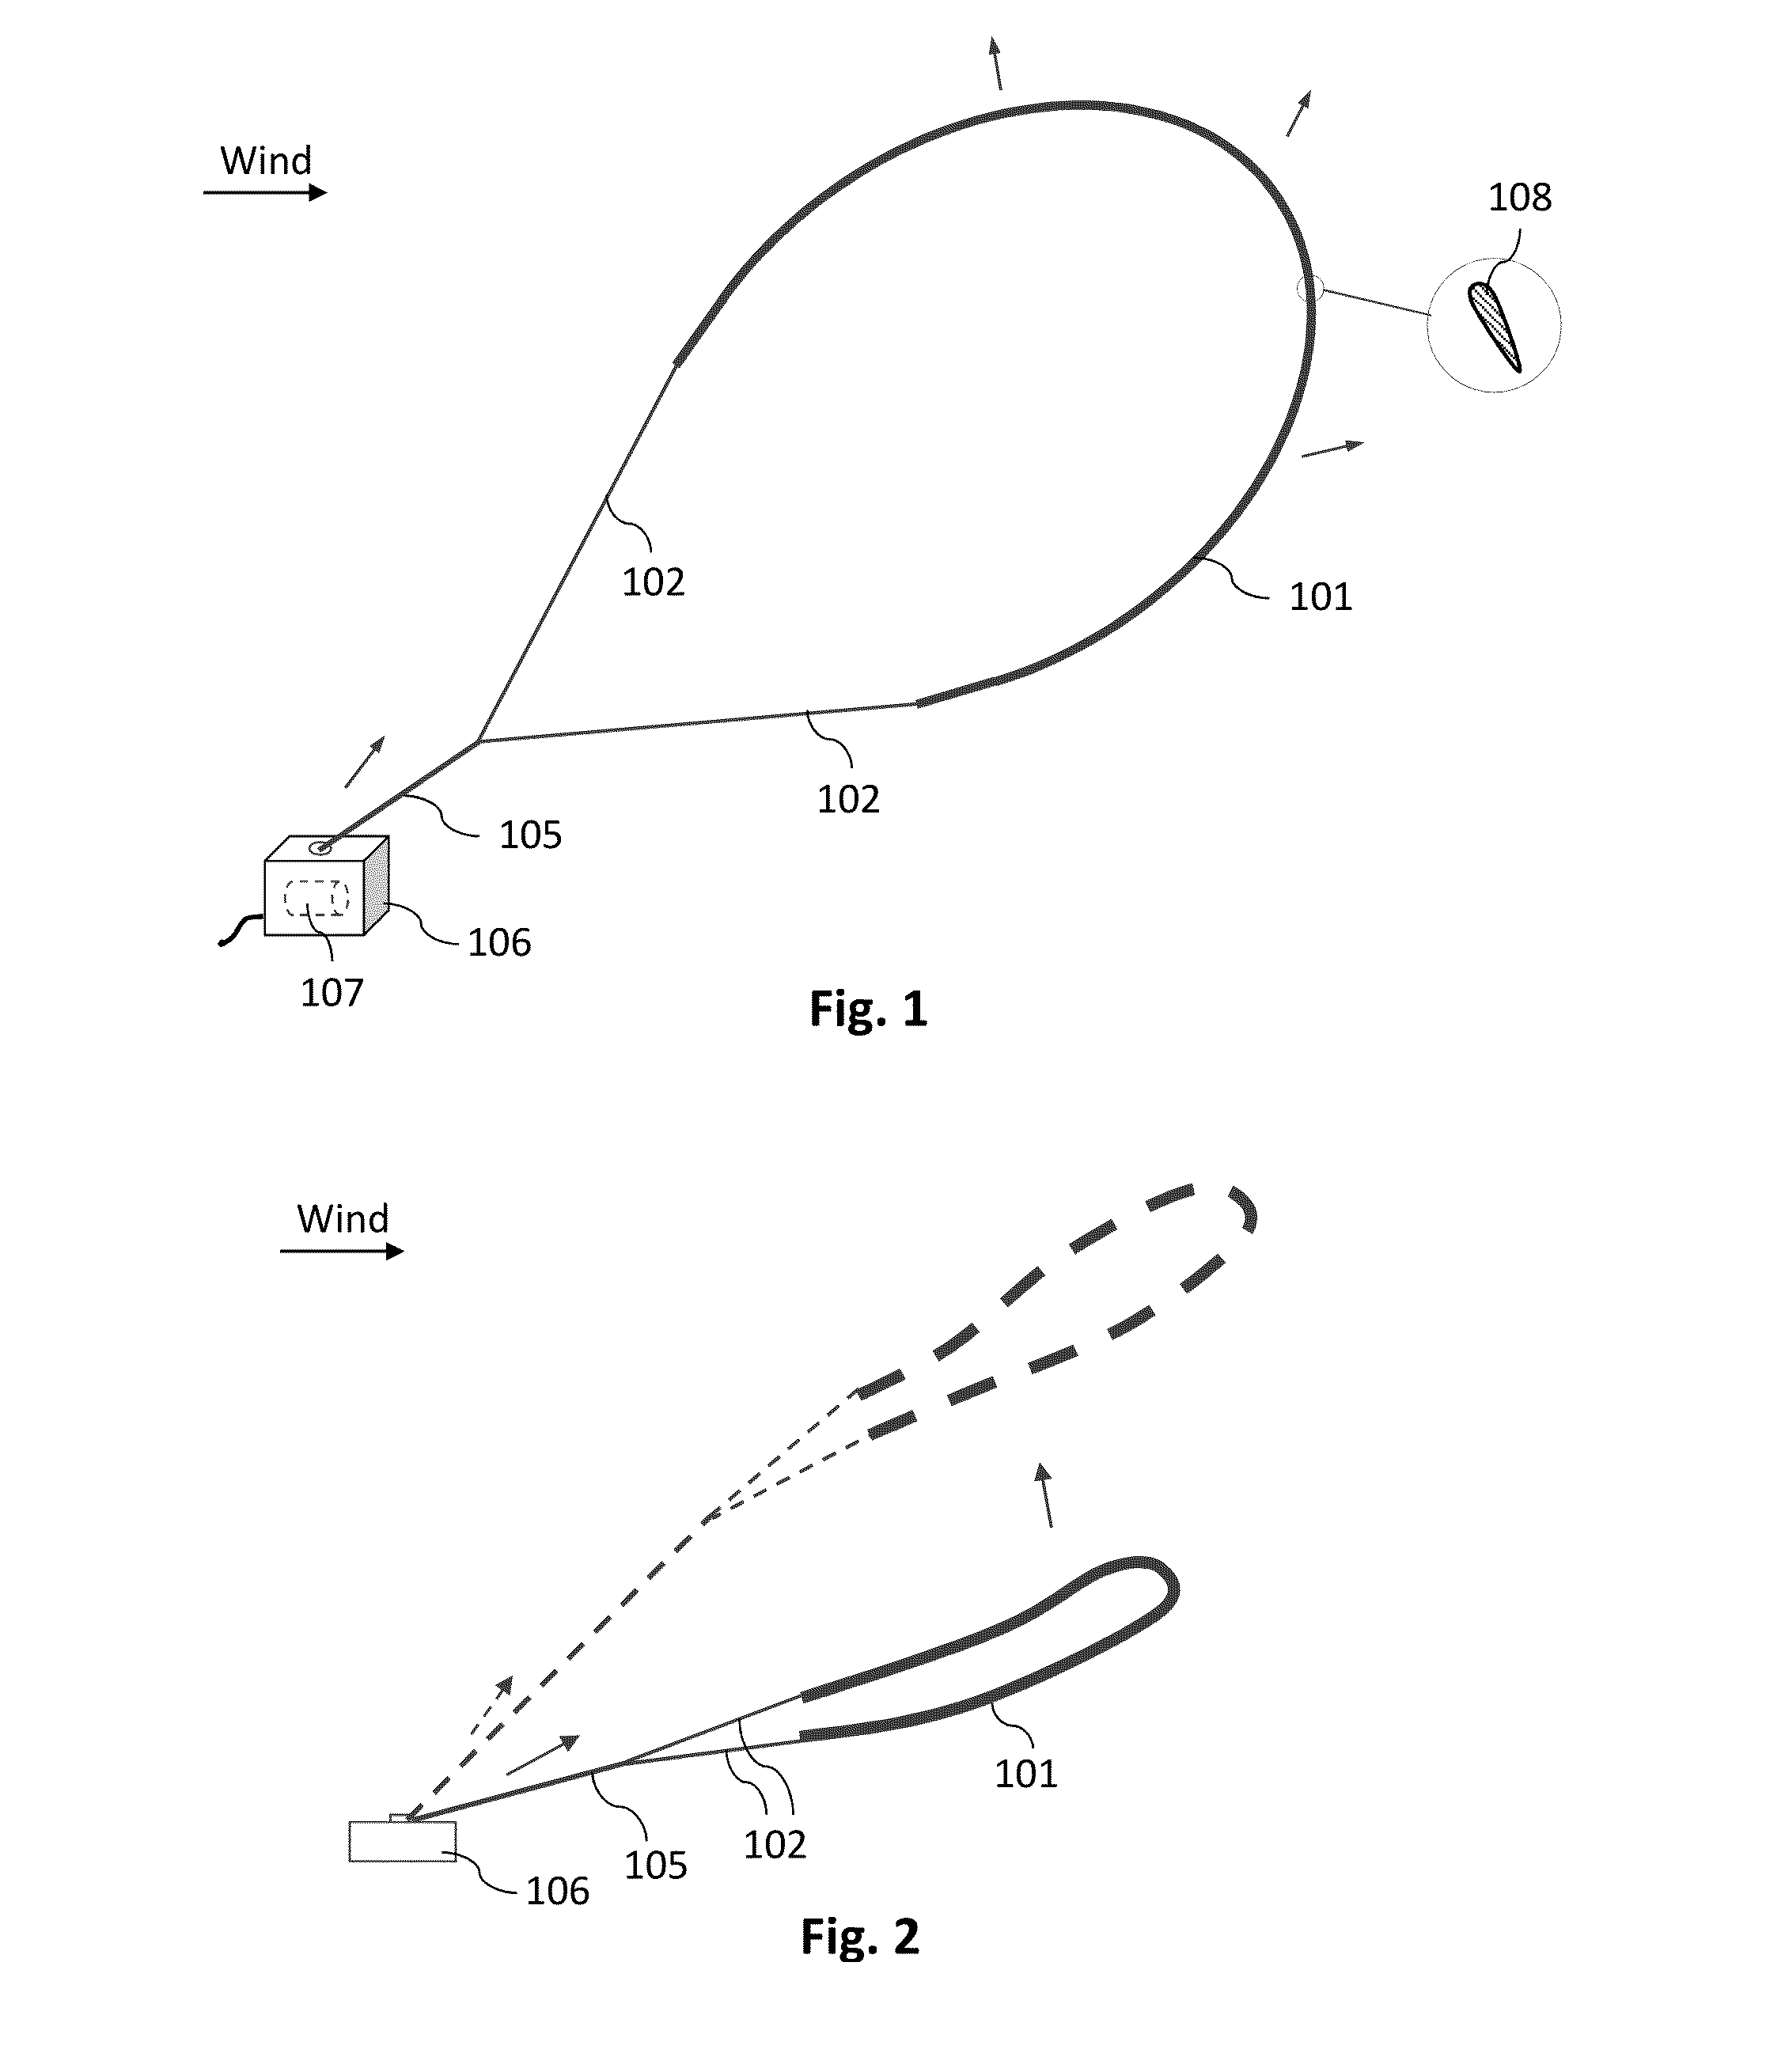 Airborne wind energy conversion system with ground generator and unorthodox power capture or transfer